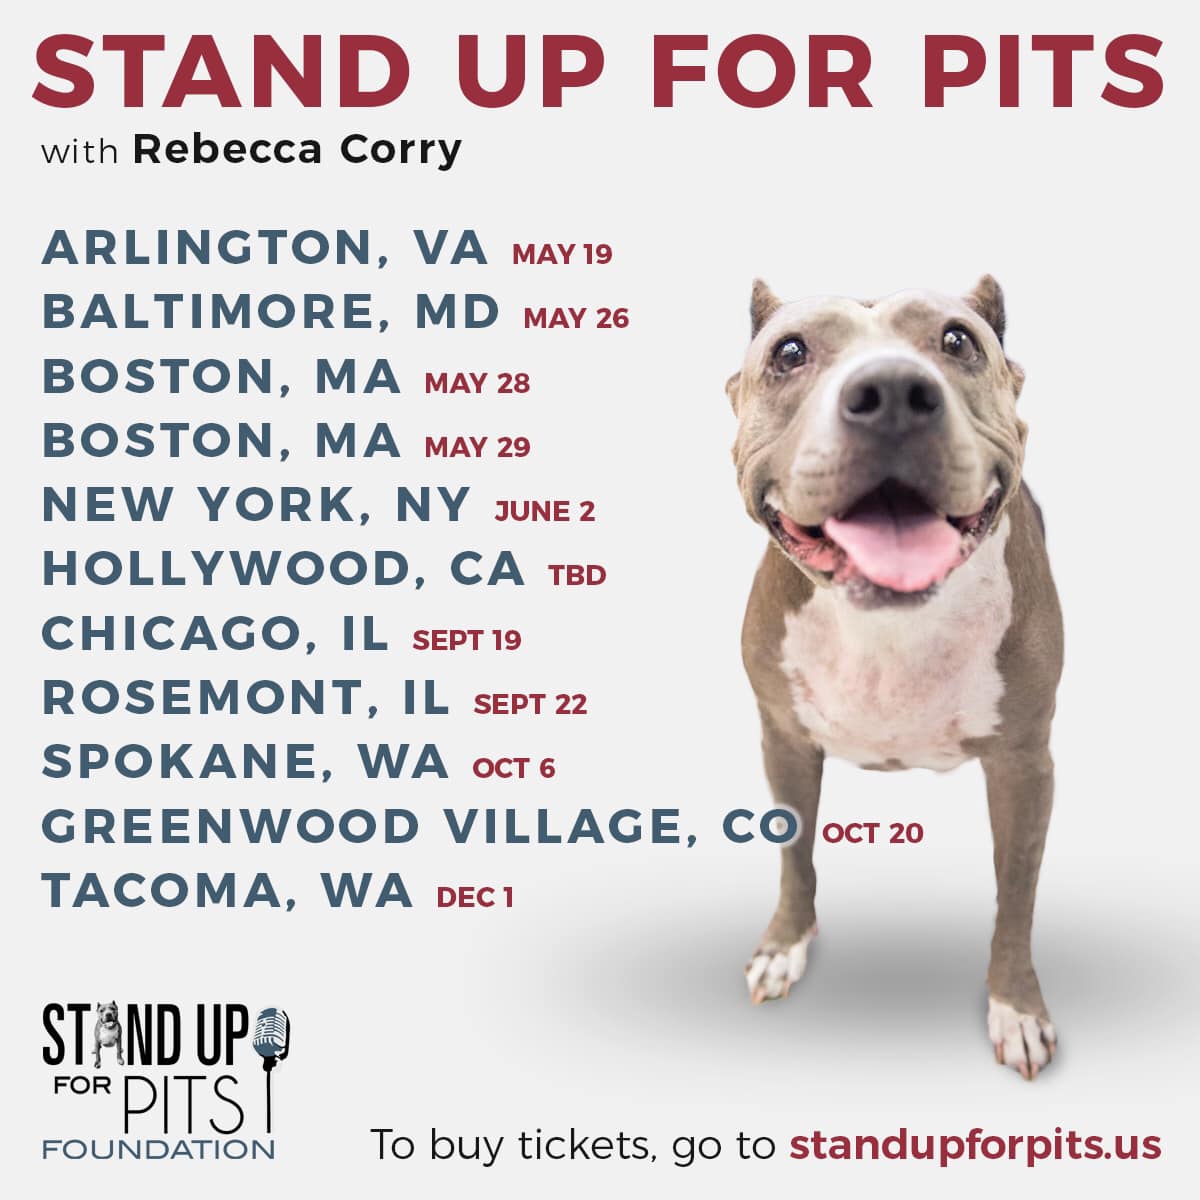 2019 Stand Up For Pits tour is here!!!